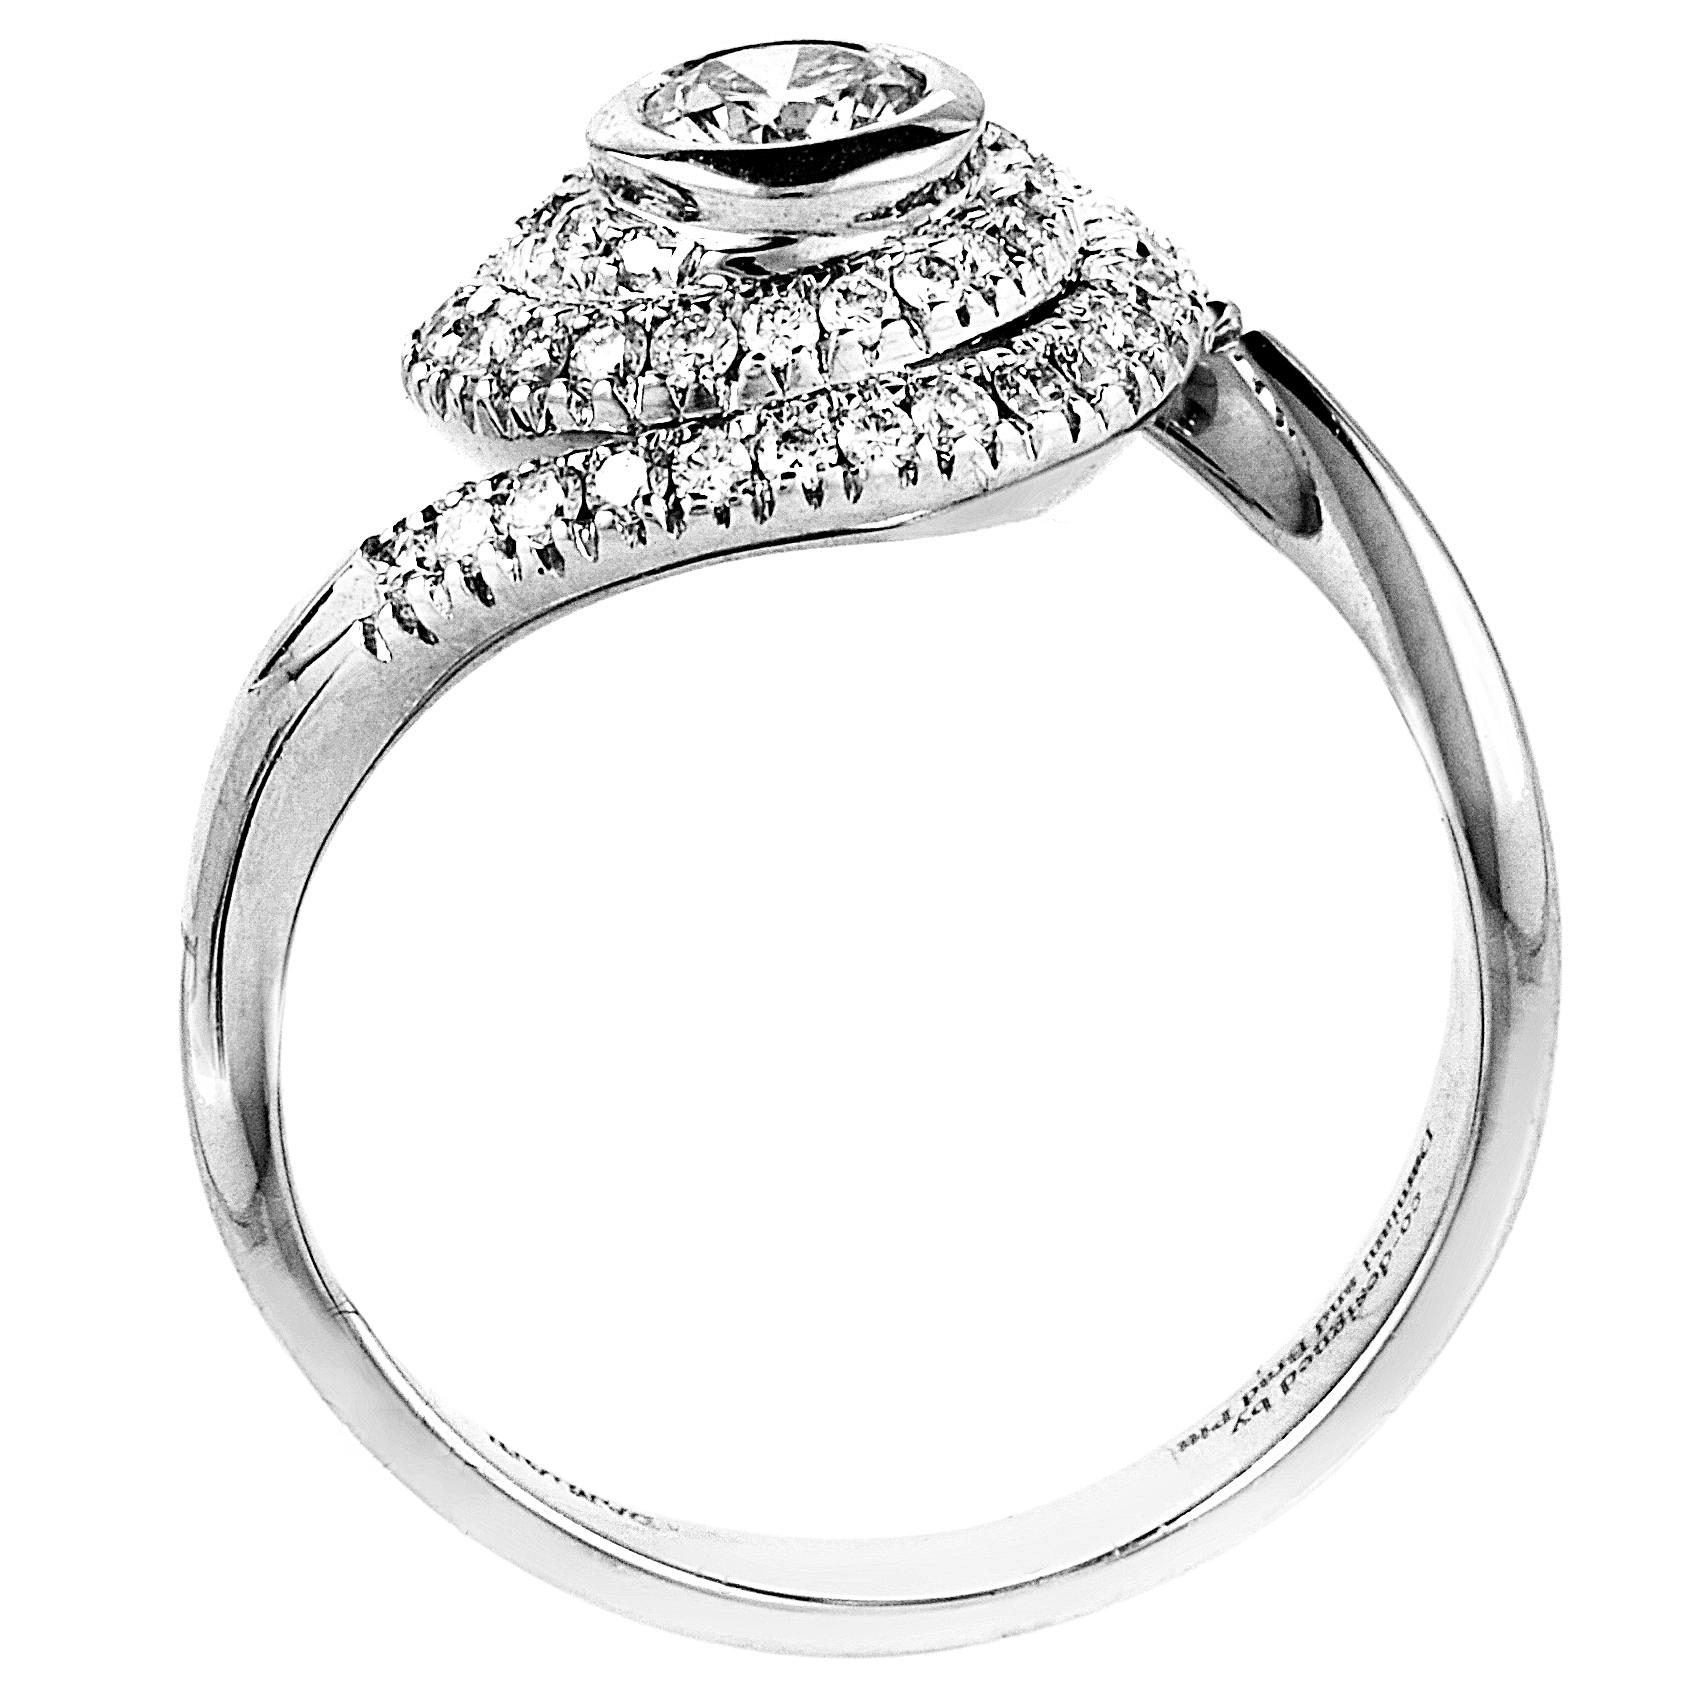 This engagement ring from Damiani has a refreshingly original look that is perfect for the lady that likes to stand out. It is made of 18K white gold and is set with ~.71ct of diamonds.
